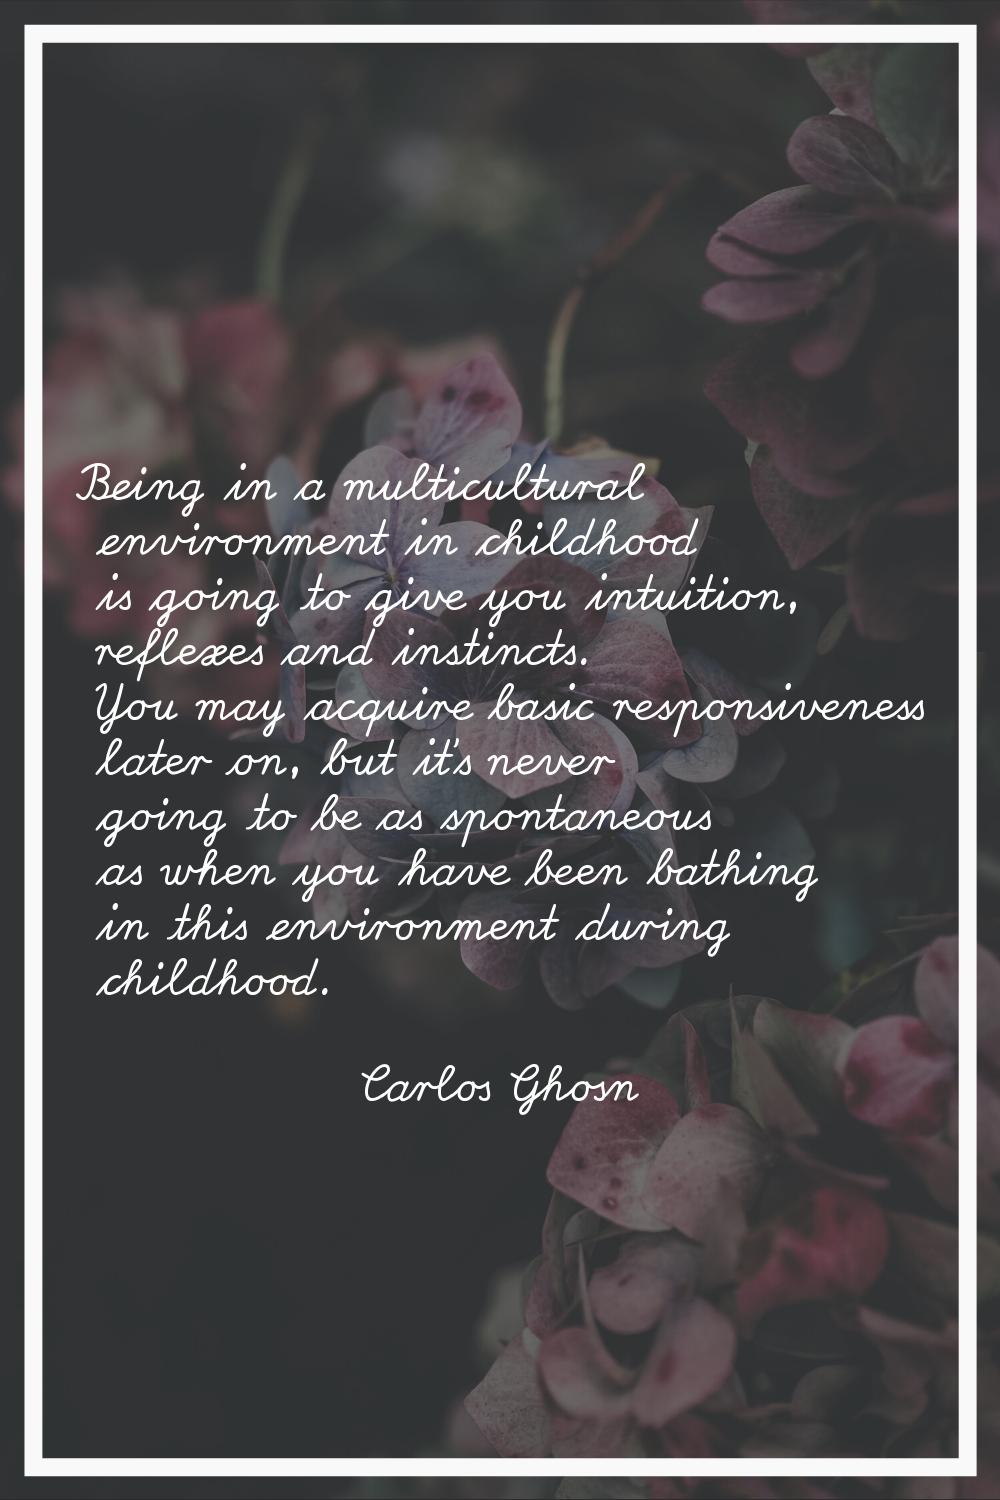 Being in a multicultural environment in childhood is going to give you intuition, reflexes and inst